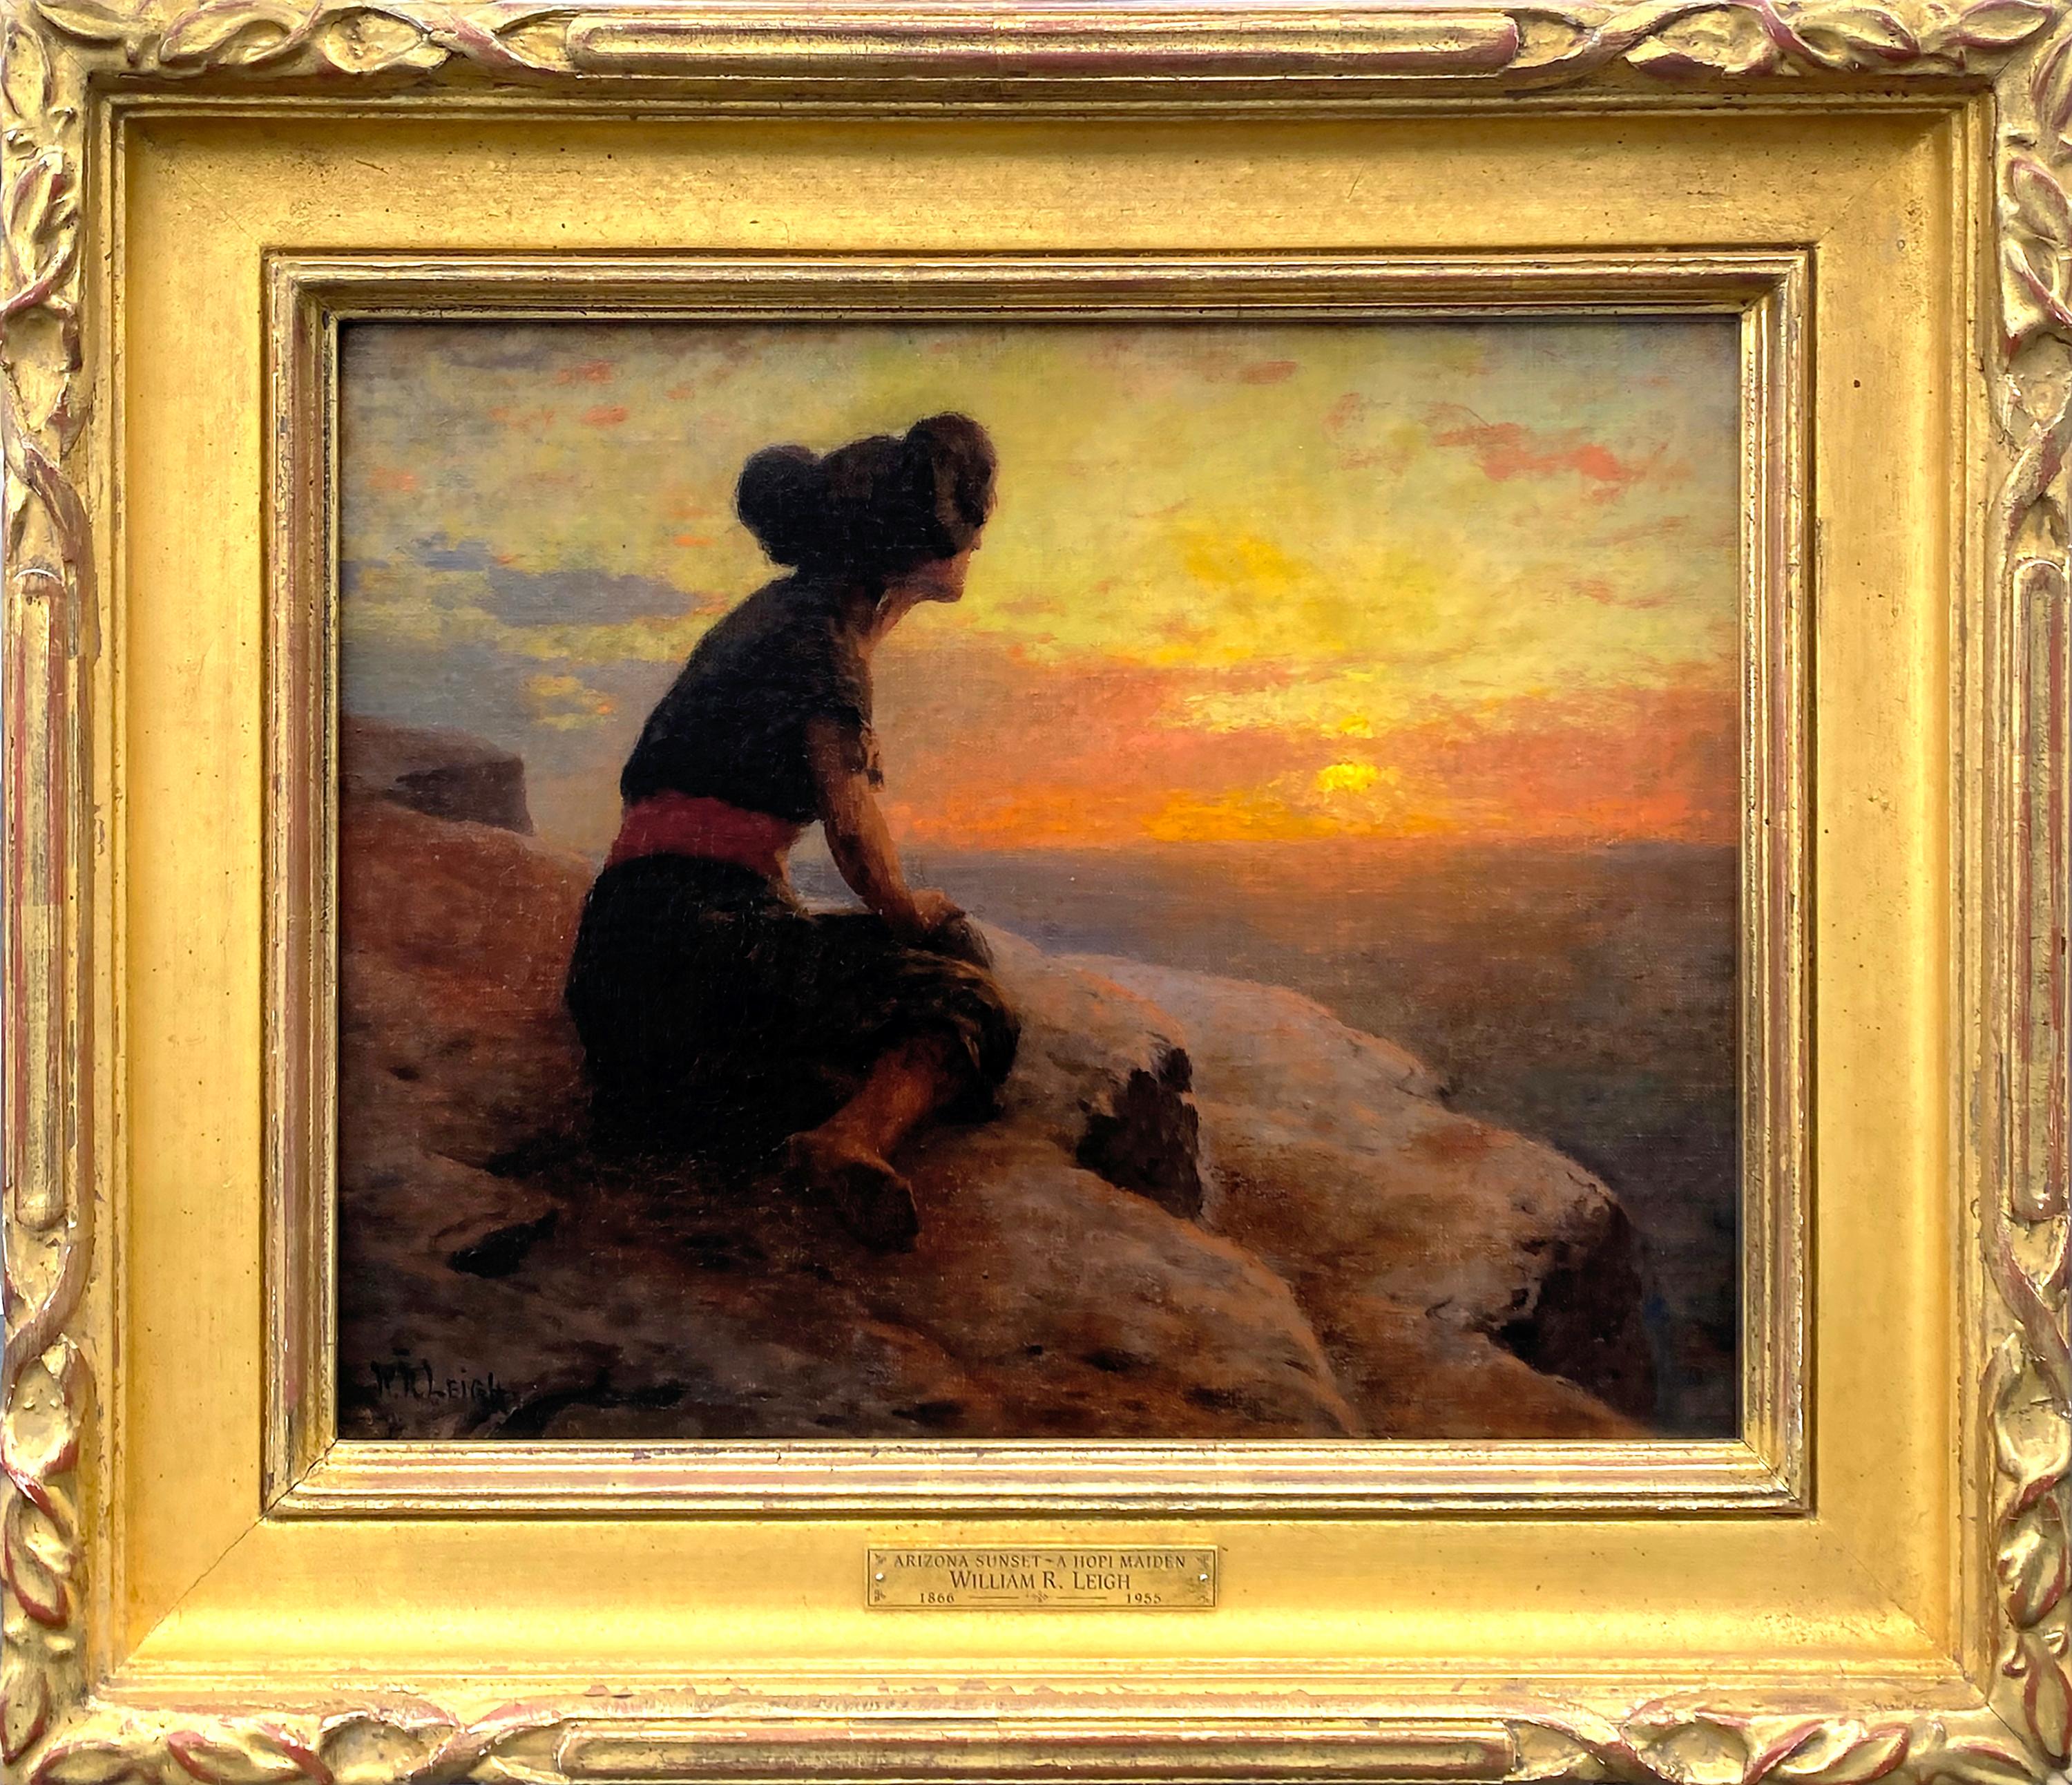 Arizona Sunset - A Hopi Maiden - Painting by William R. Leigh